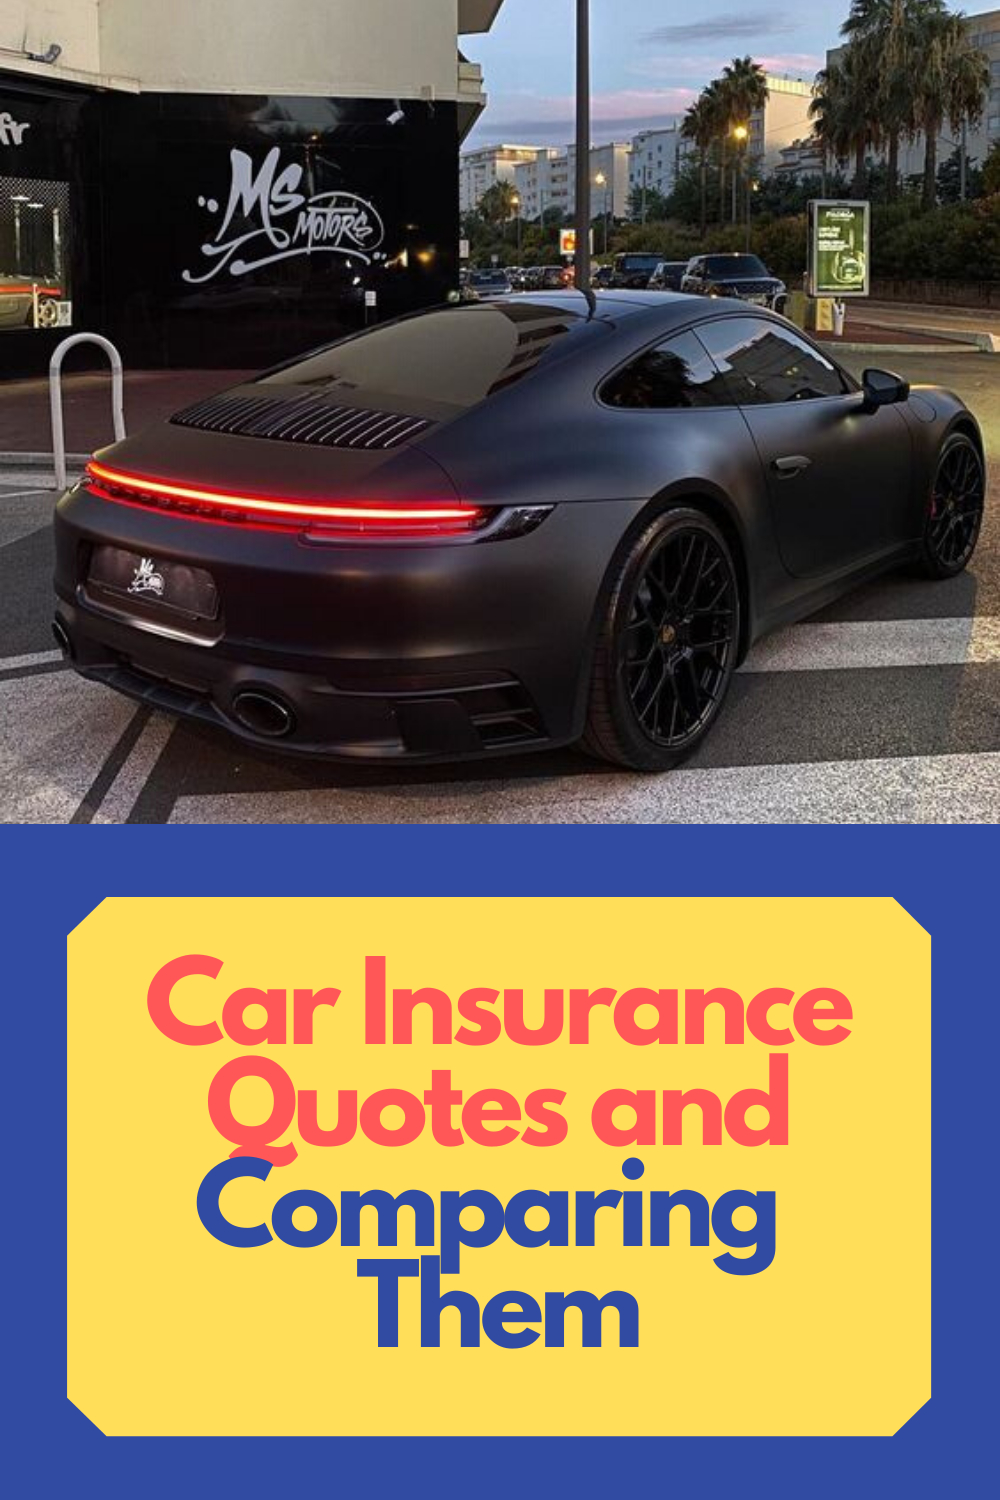 Car Insurance Quotes And Comparing Them inside measurements 1000 X 1500